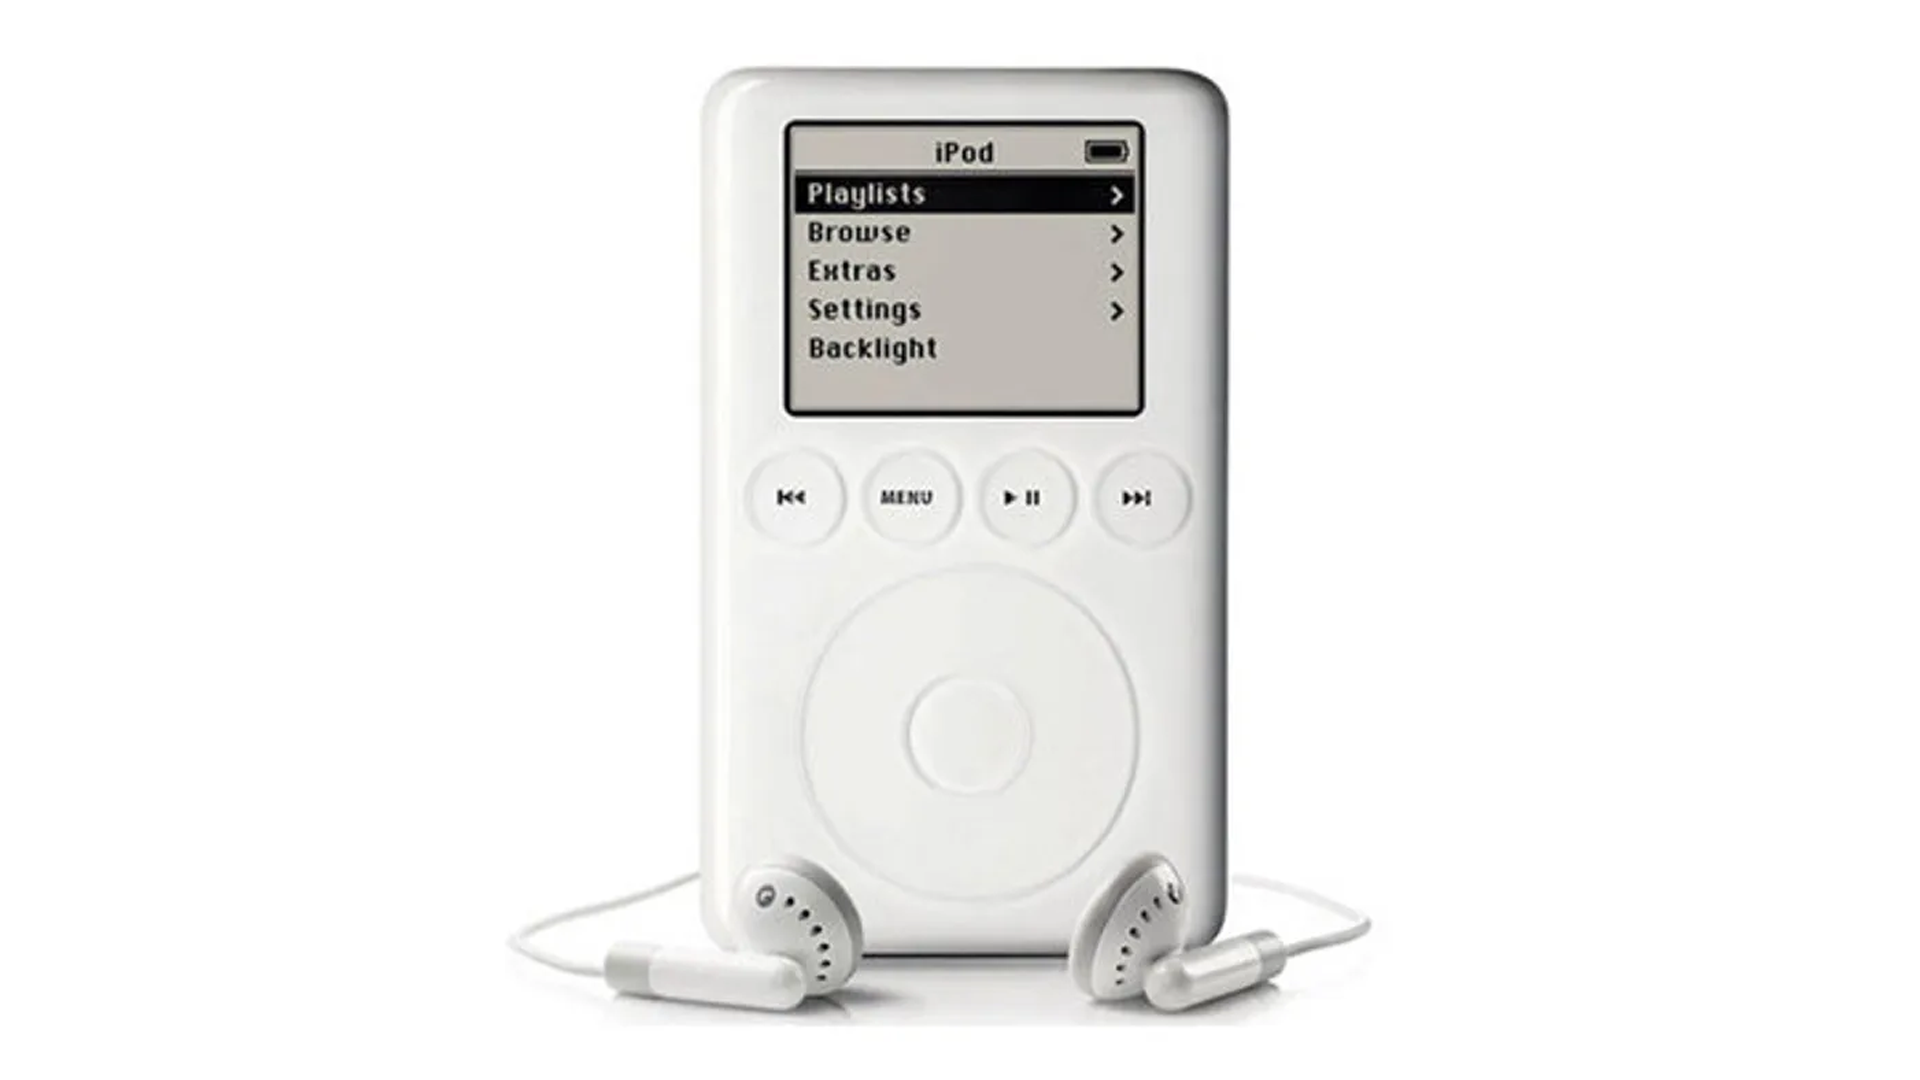 iPod (3rd Generation) released in 2003